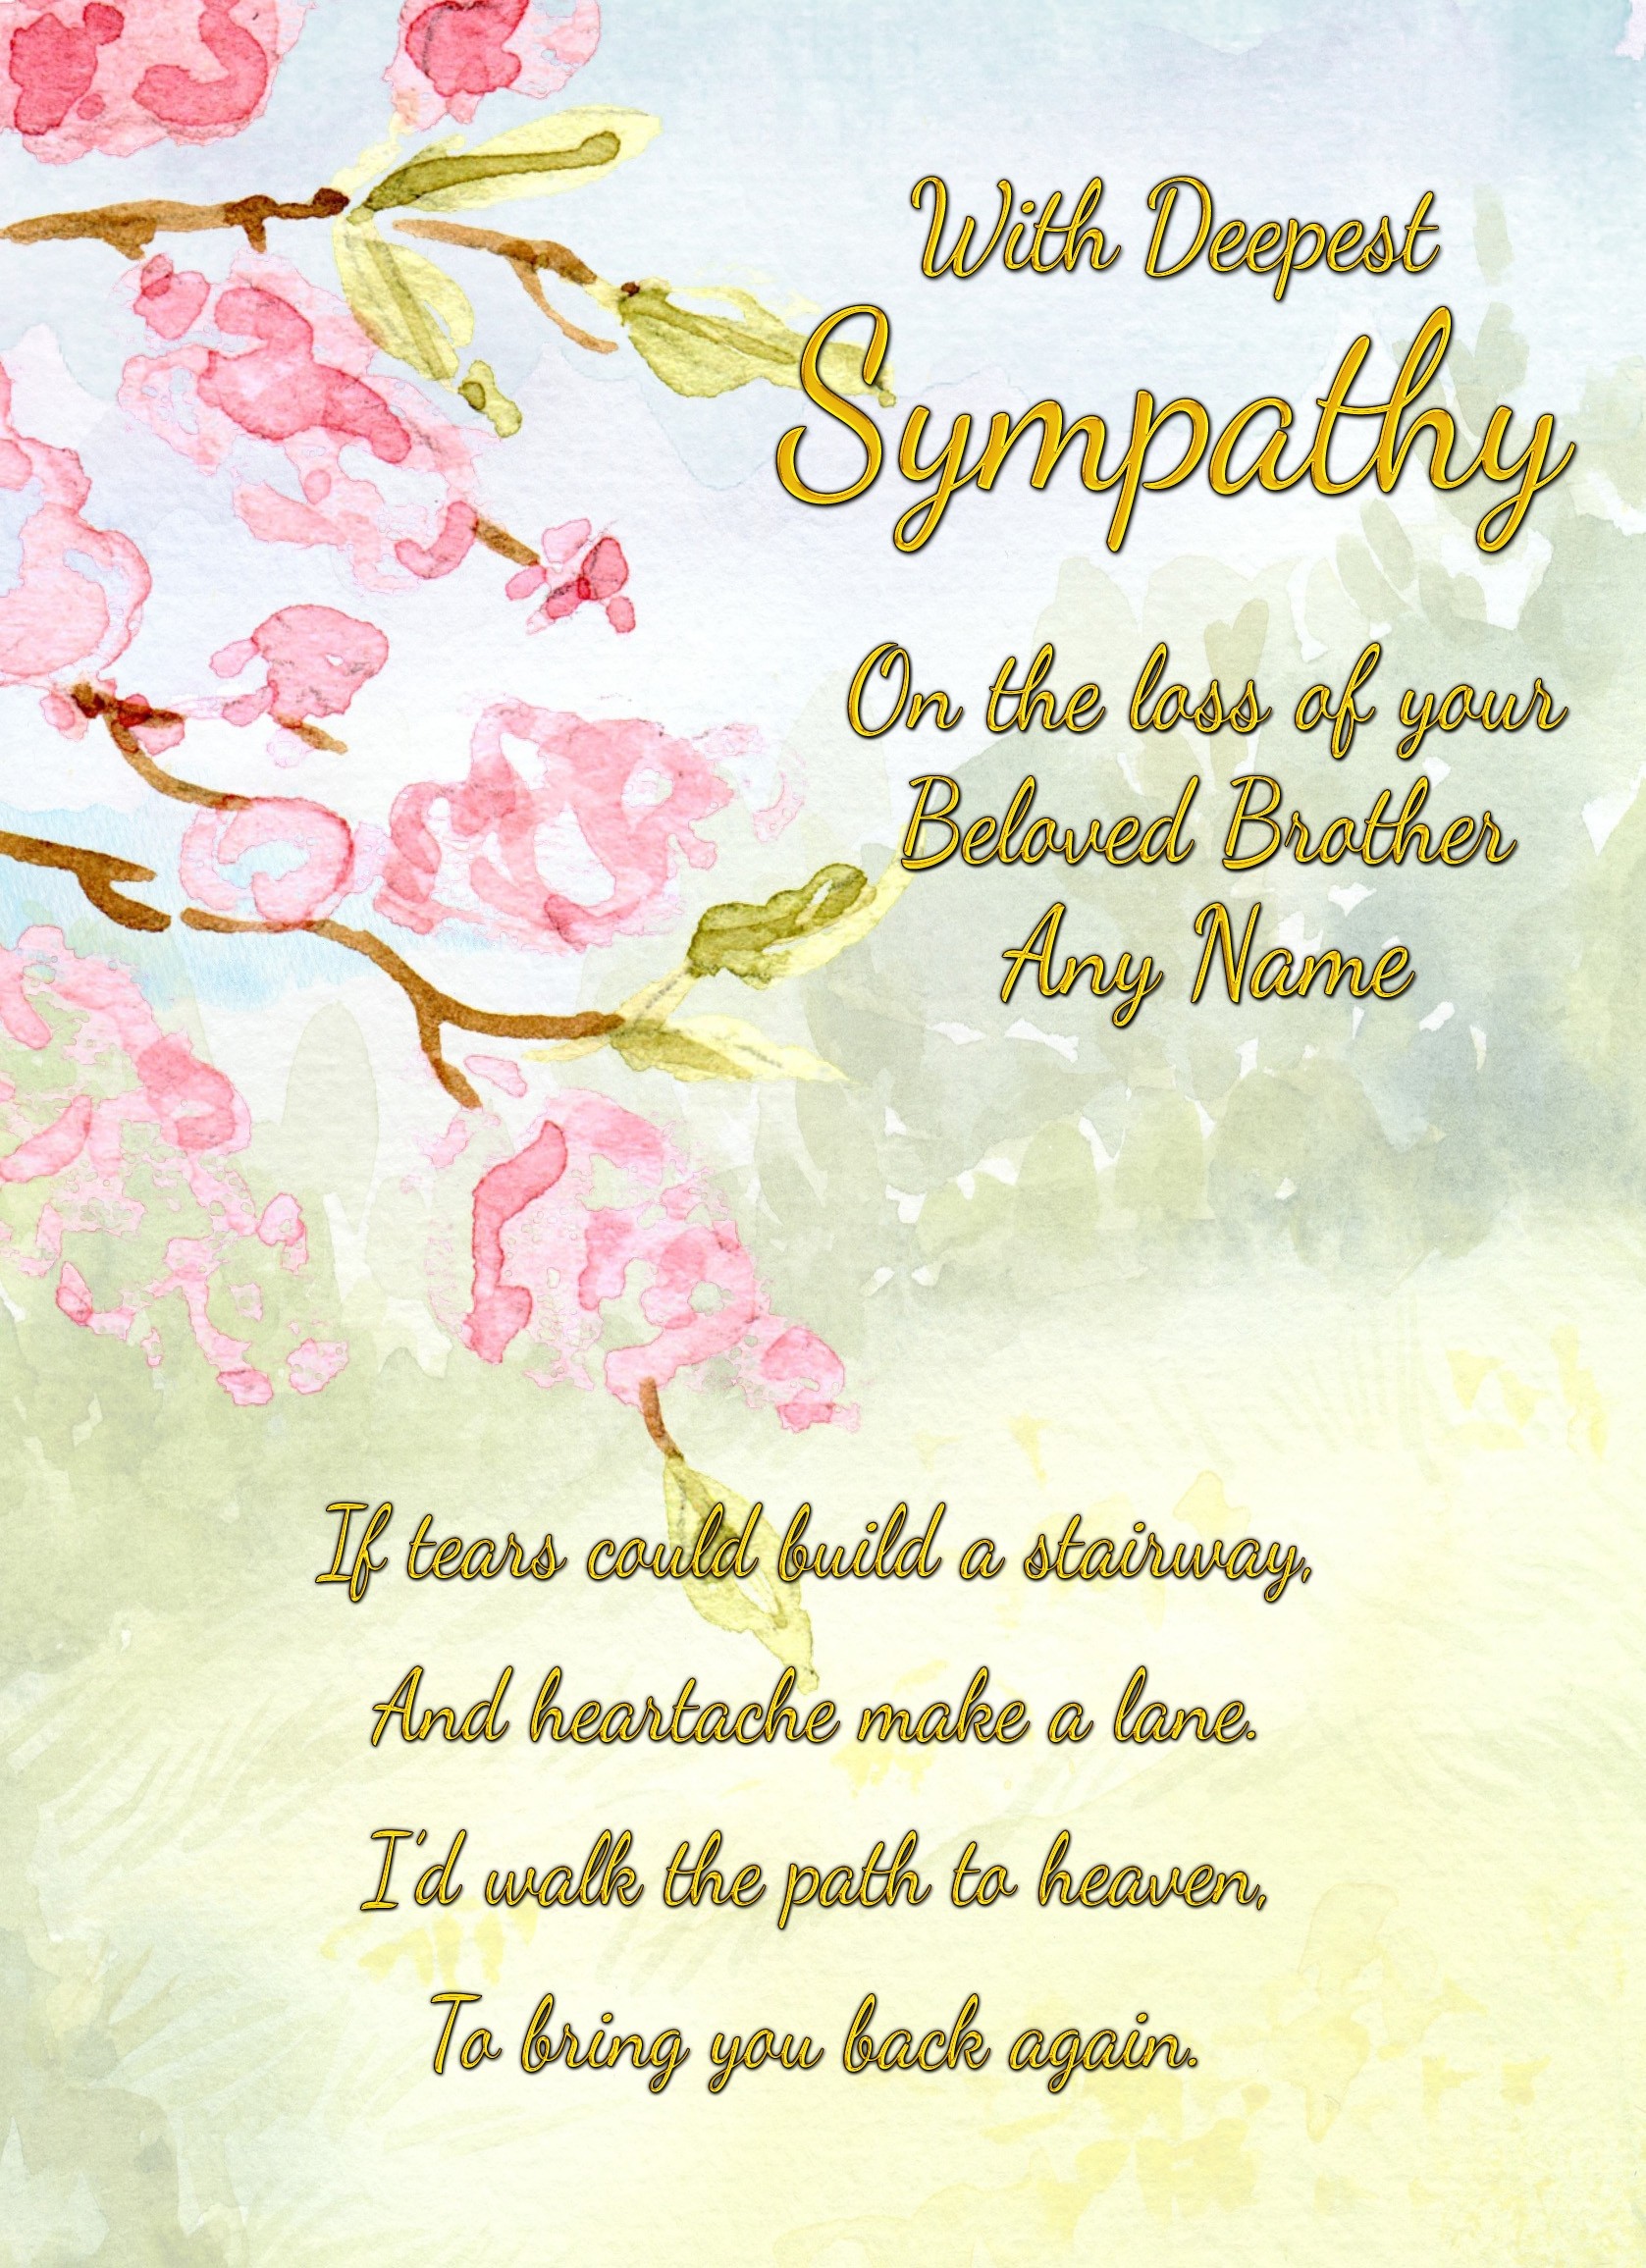 Personalised Sympathy Bereavement Card (With Deepest Sympathy, Beloved Brother)